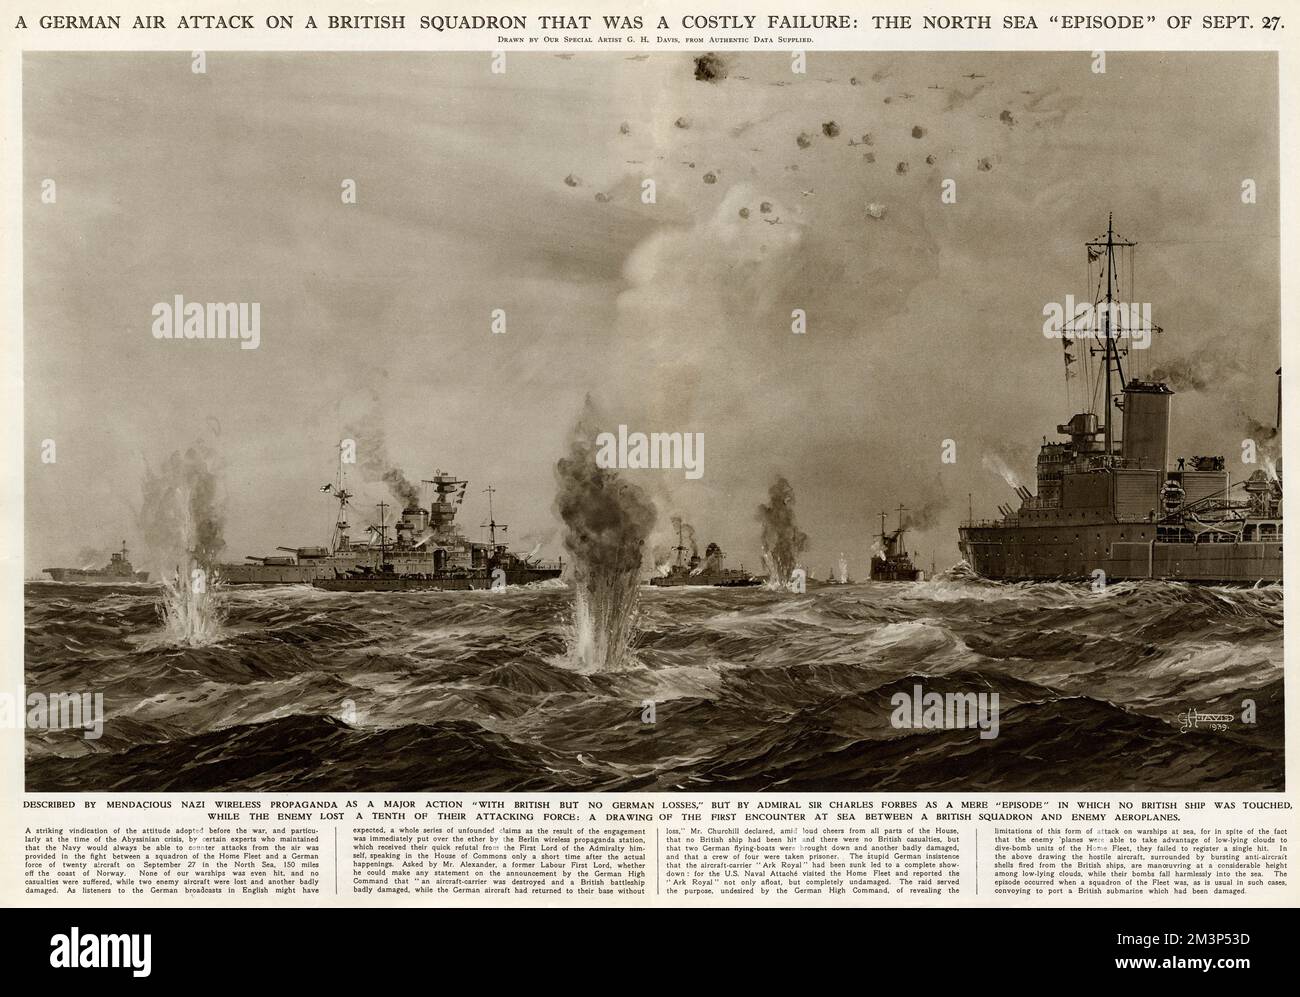 A German air attack on a British squadron in the North Sea, 150 miles off the coast of Norway, in the early stages of the Second World War.  German propaganda claimed there had been British losses, but Admiral Sir Charles Forbes described it as an 'episode' during which no British ship was touched.      Date: 27 September 1939 Stock Photo